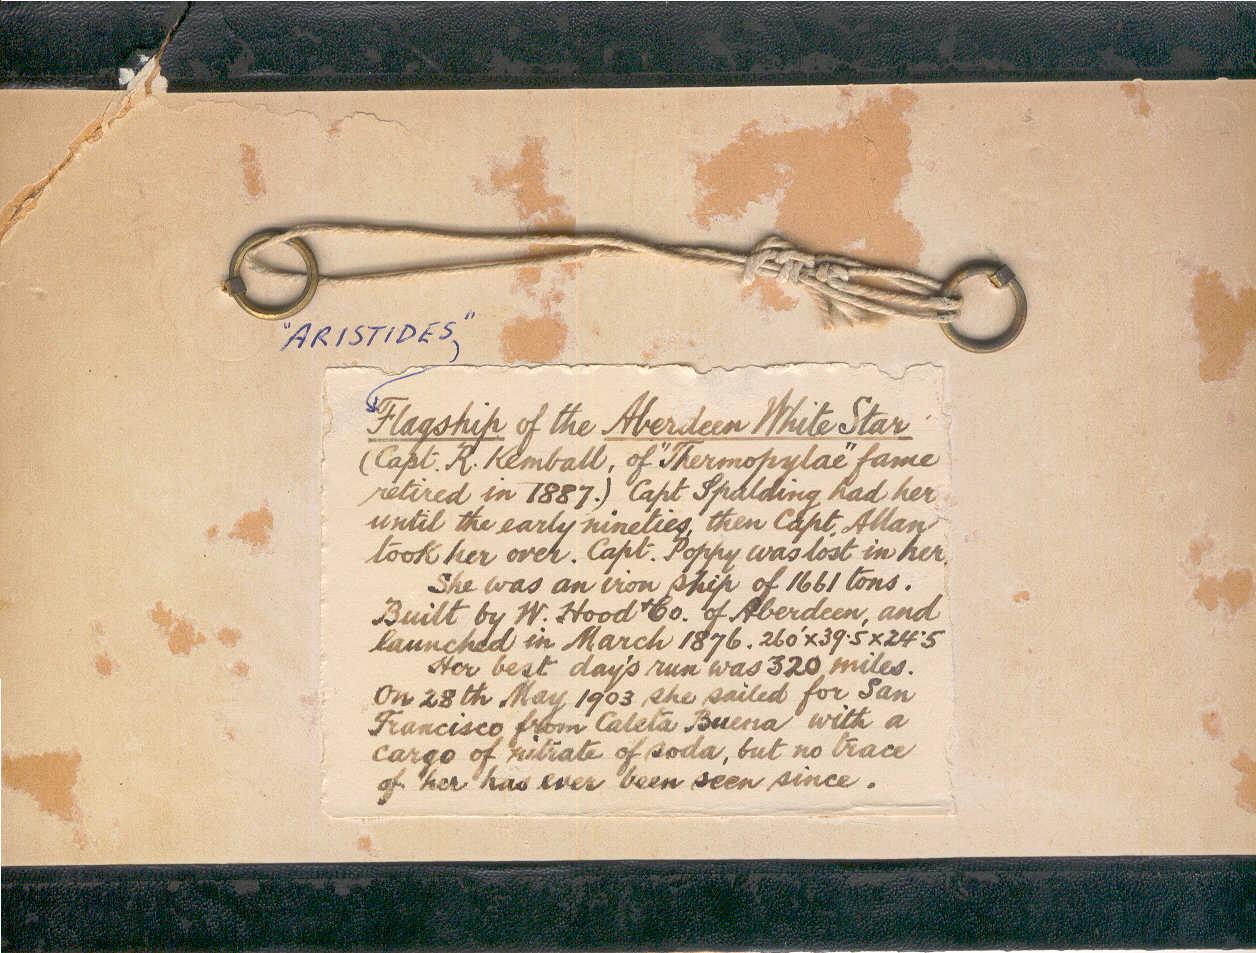 Card which was evidently the backing for a frame photograph of the full rigger "Aristides"